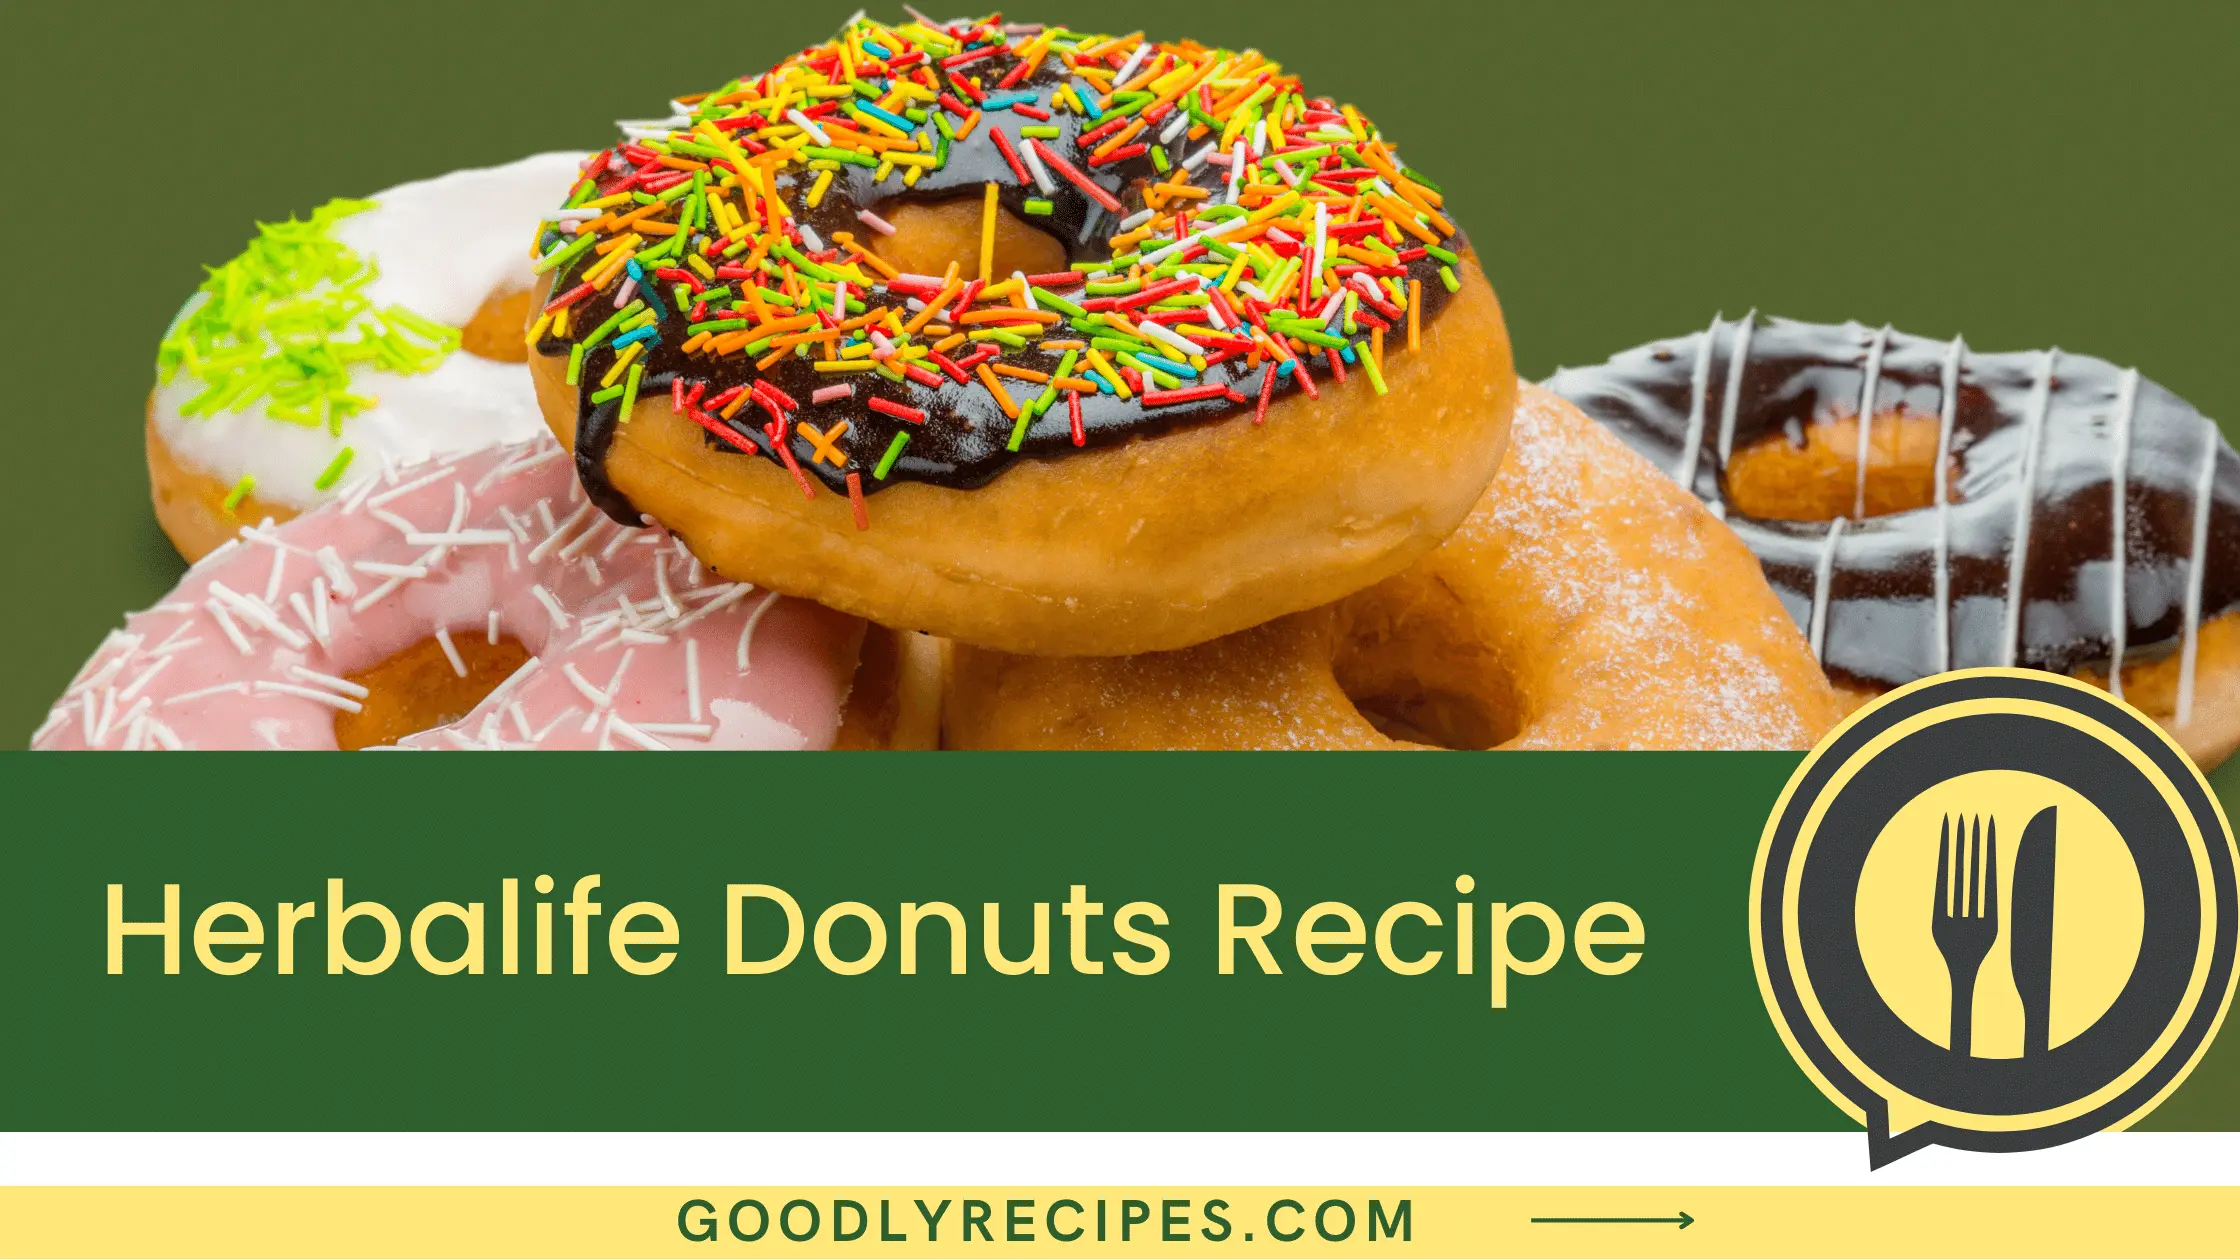 Herbalife Donuts Recipe - For Food Lovers